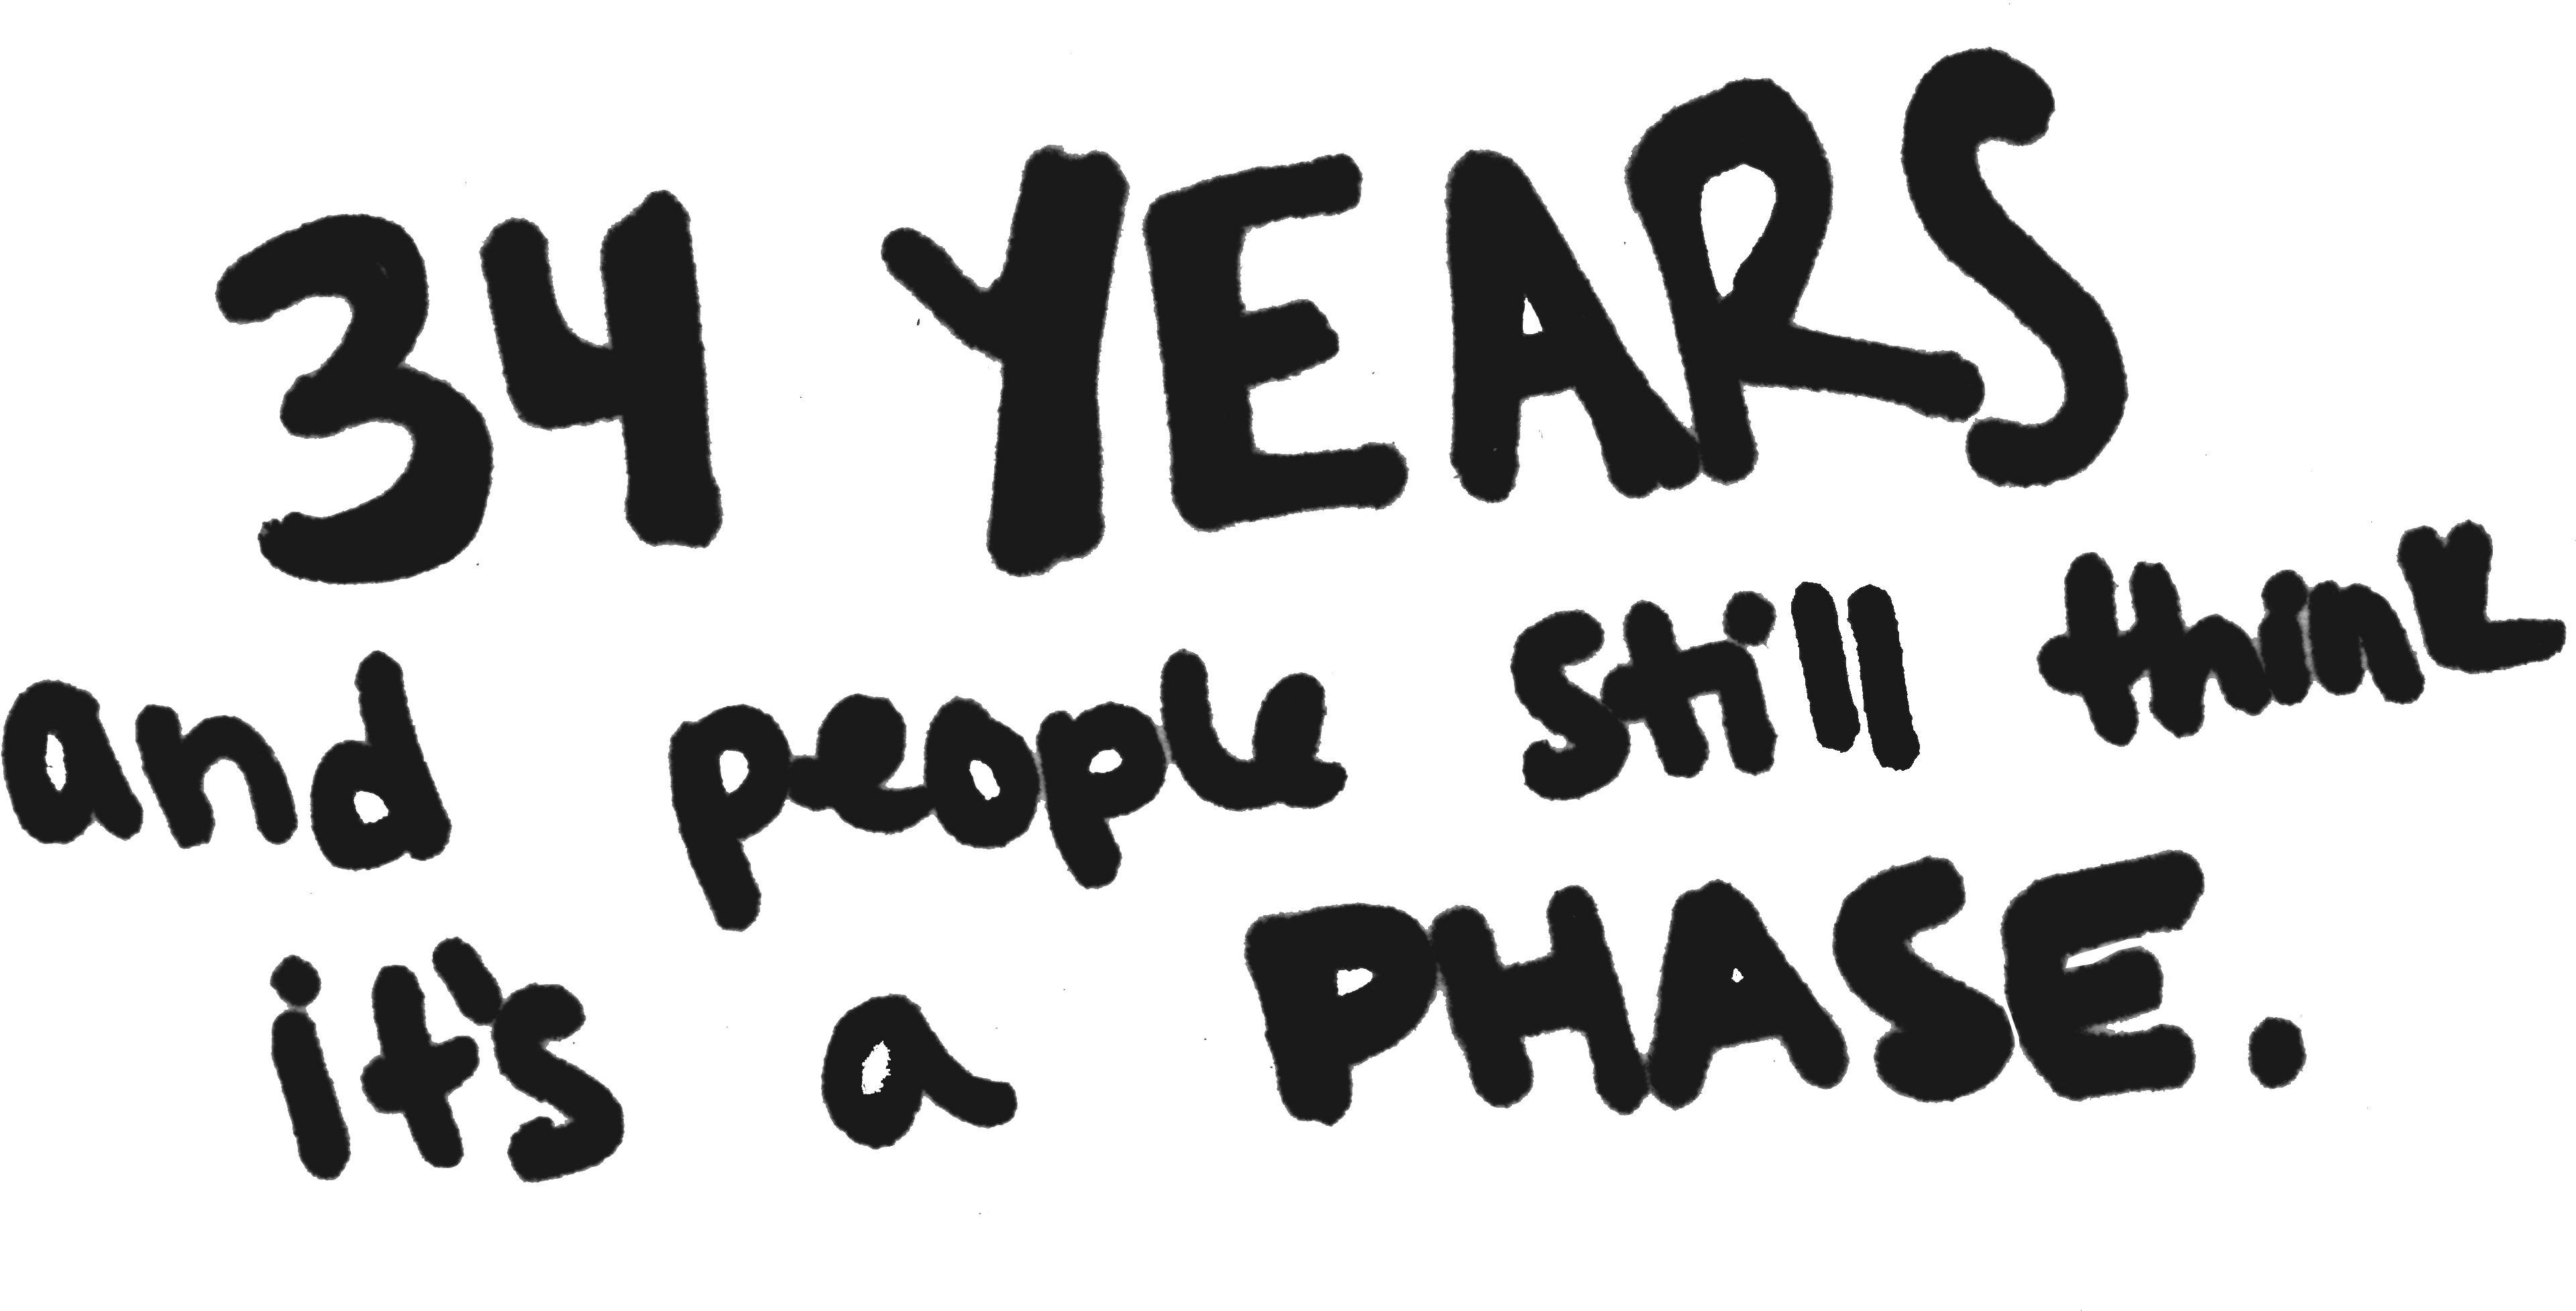 34 years and people still think it's a phase.